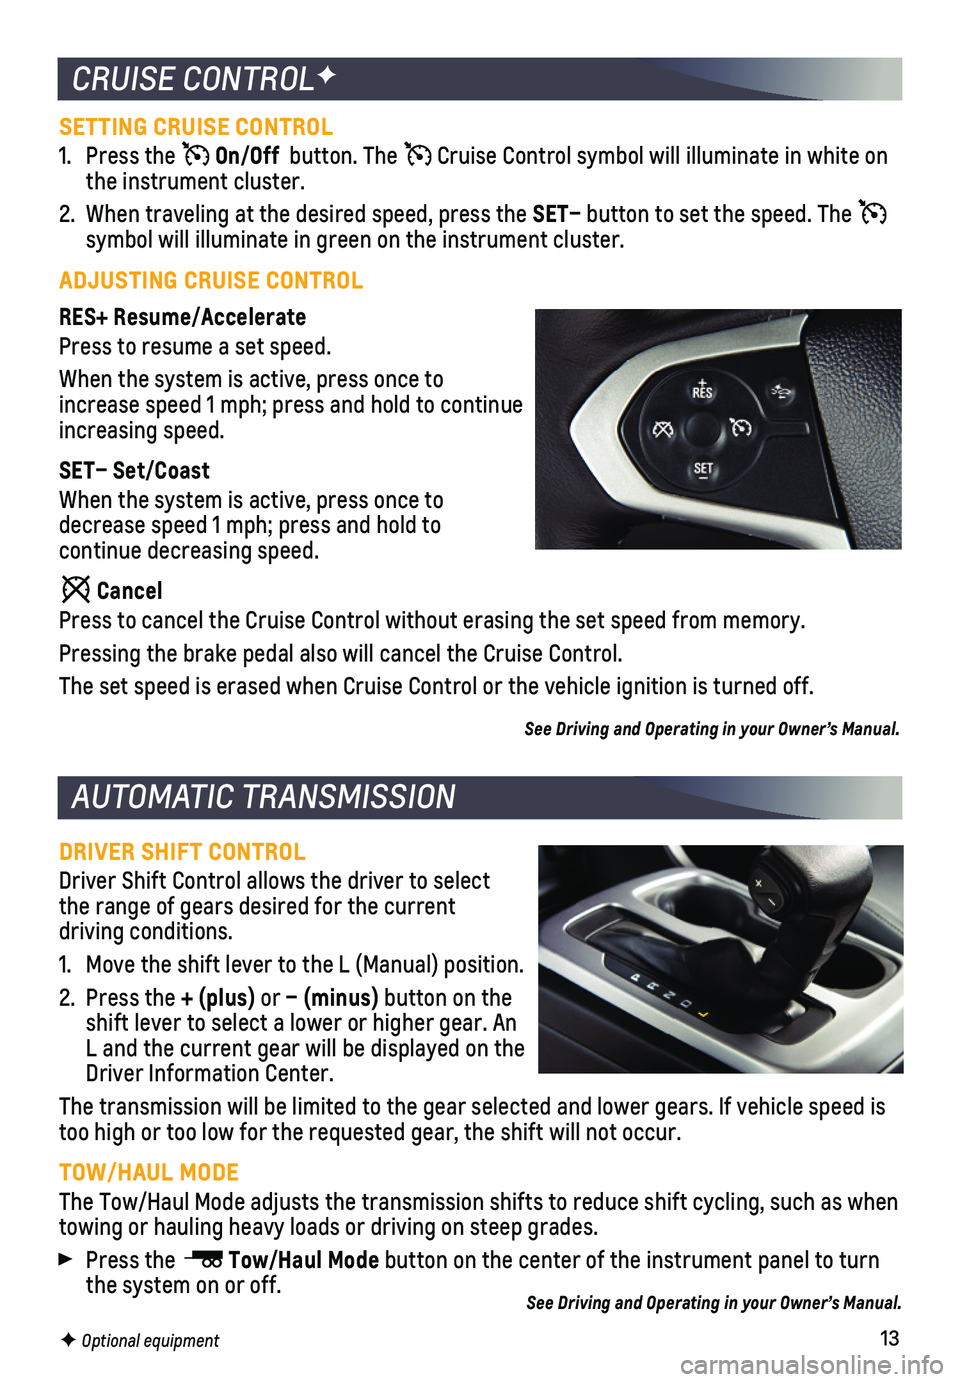 CHEVROLET COLORADO 2020  Get To Know Guide 13
SETTING CRUISE CONTROL
1. Press the  On/Off  button. The  Cruise Control symbol will illuminate in white on the instrument cluster.
2. When traveling at the desired speed, press the SET– button t